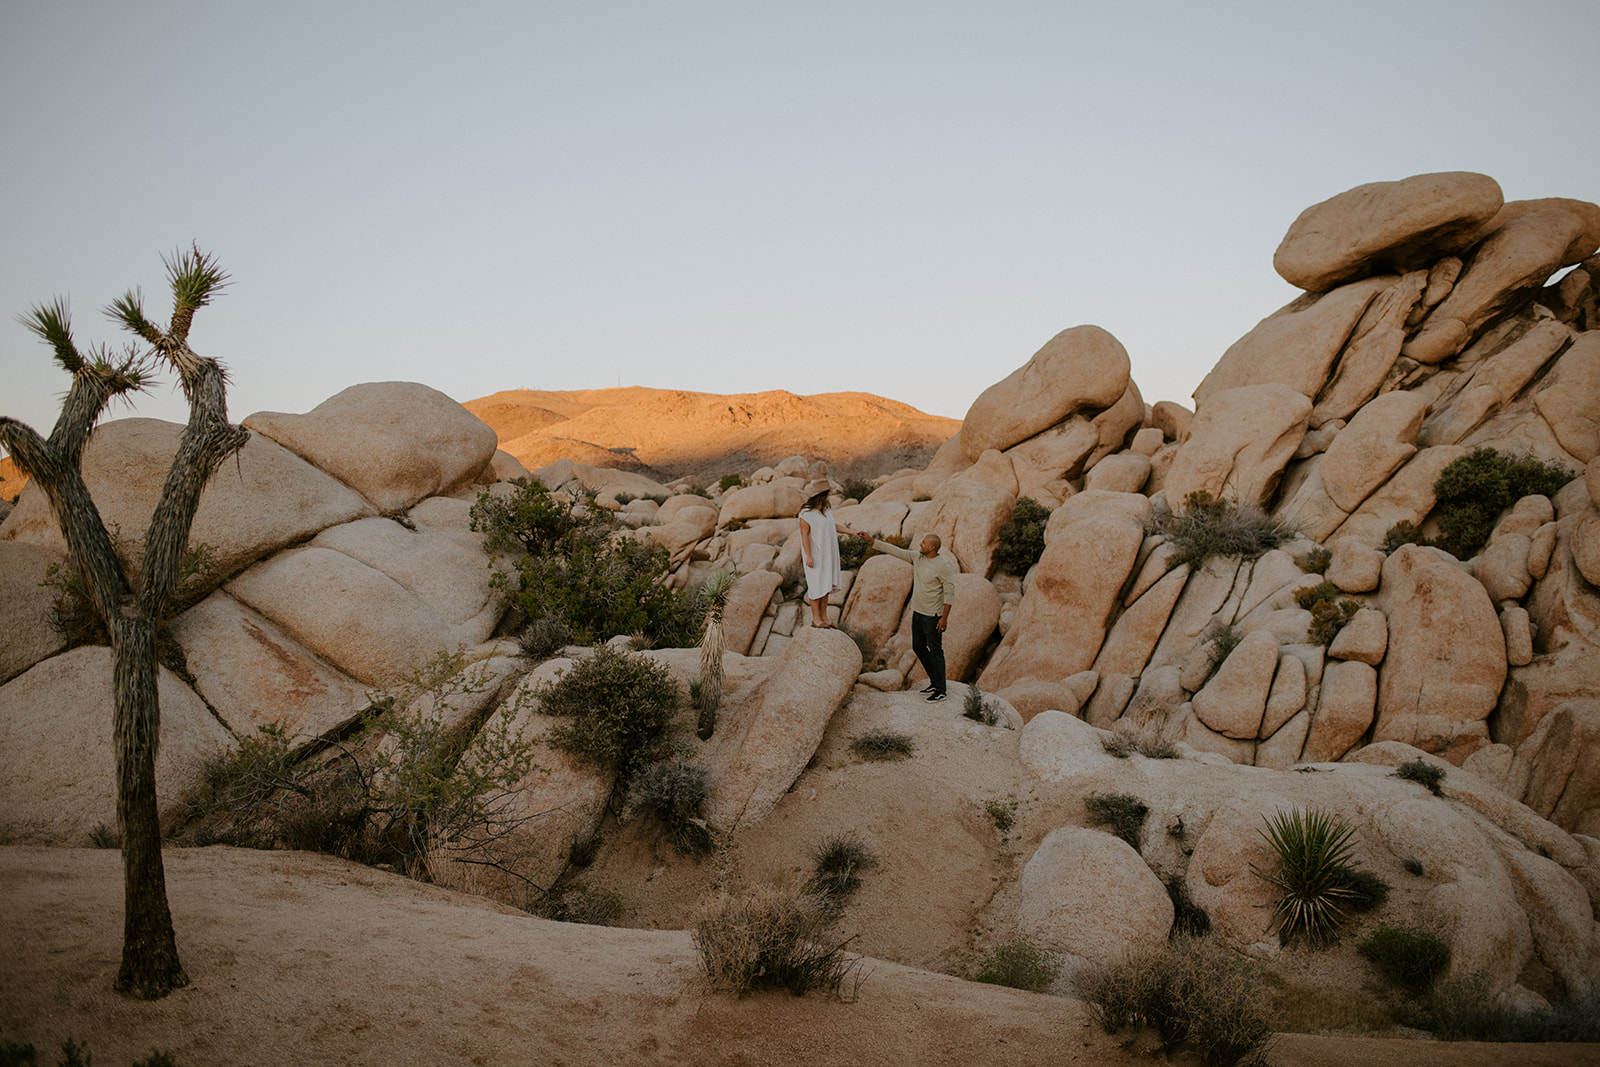 A photography session for a couple in Joshua tree national park in Southern California 